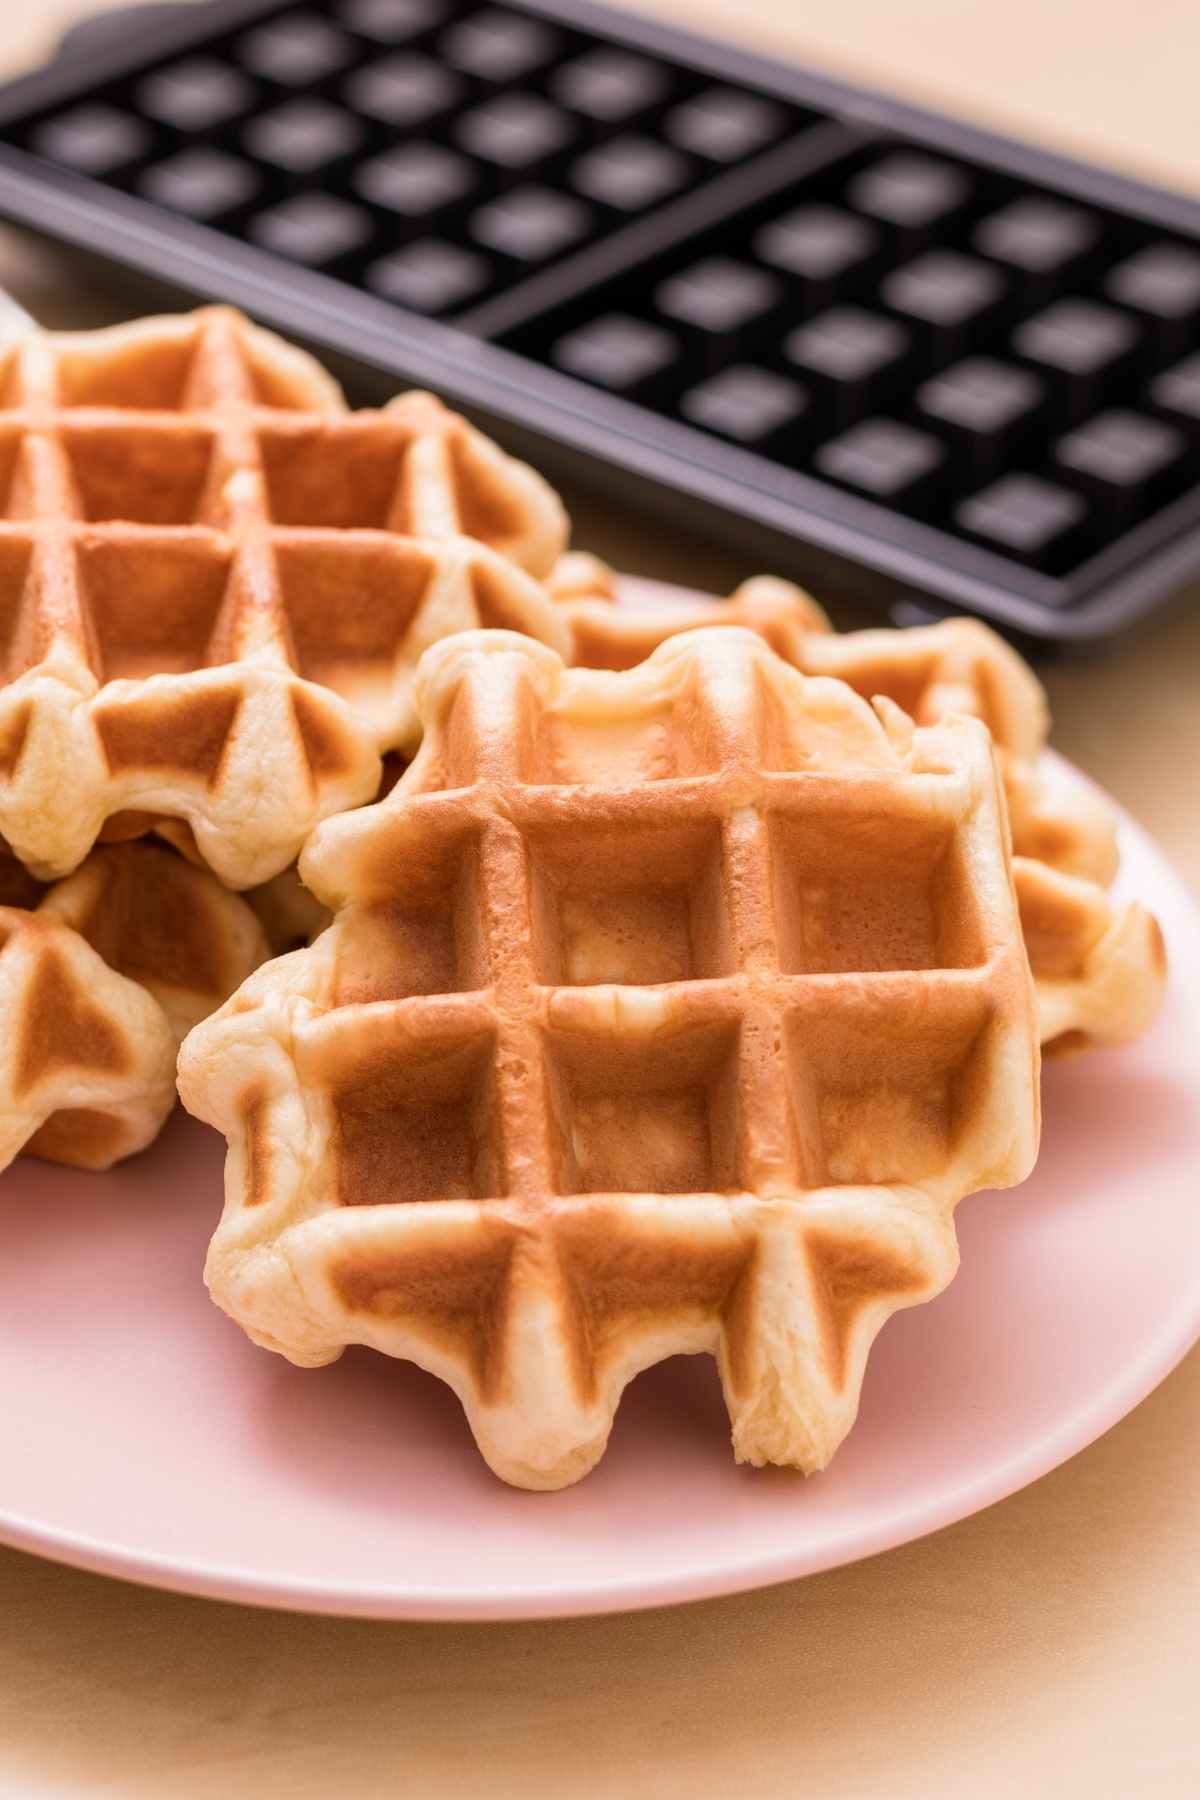 If you’ve enjoyed the Japanese rice cakes known as mochi, you know they’re deliciously sweet and chewy. These mochi waffles feature a wonderful chewy texture and are super easy to make!